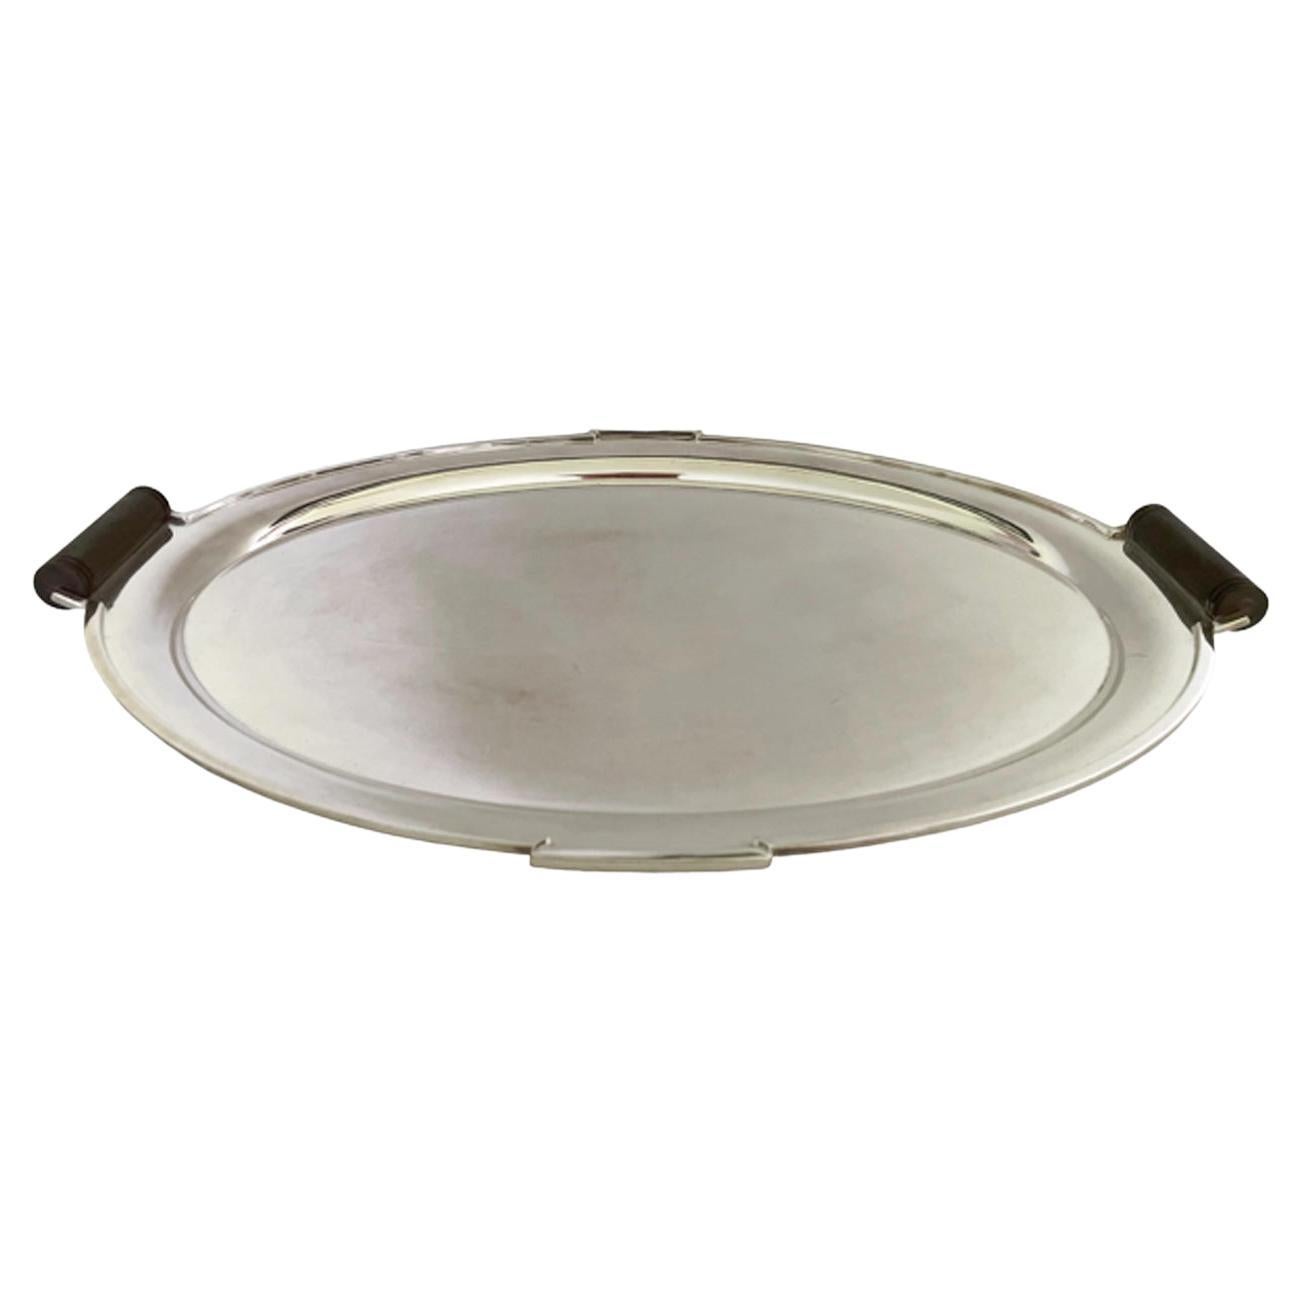 Art Deco Silver Plate Serving Tray of Oval Form with Turned Wood Handles